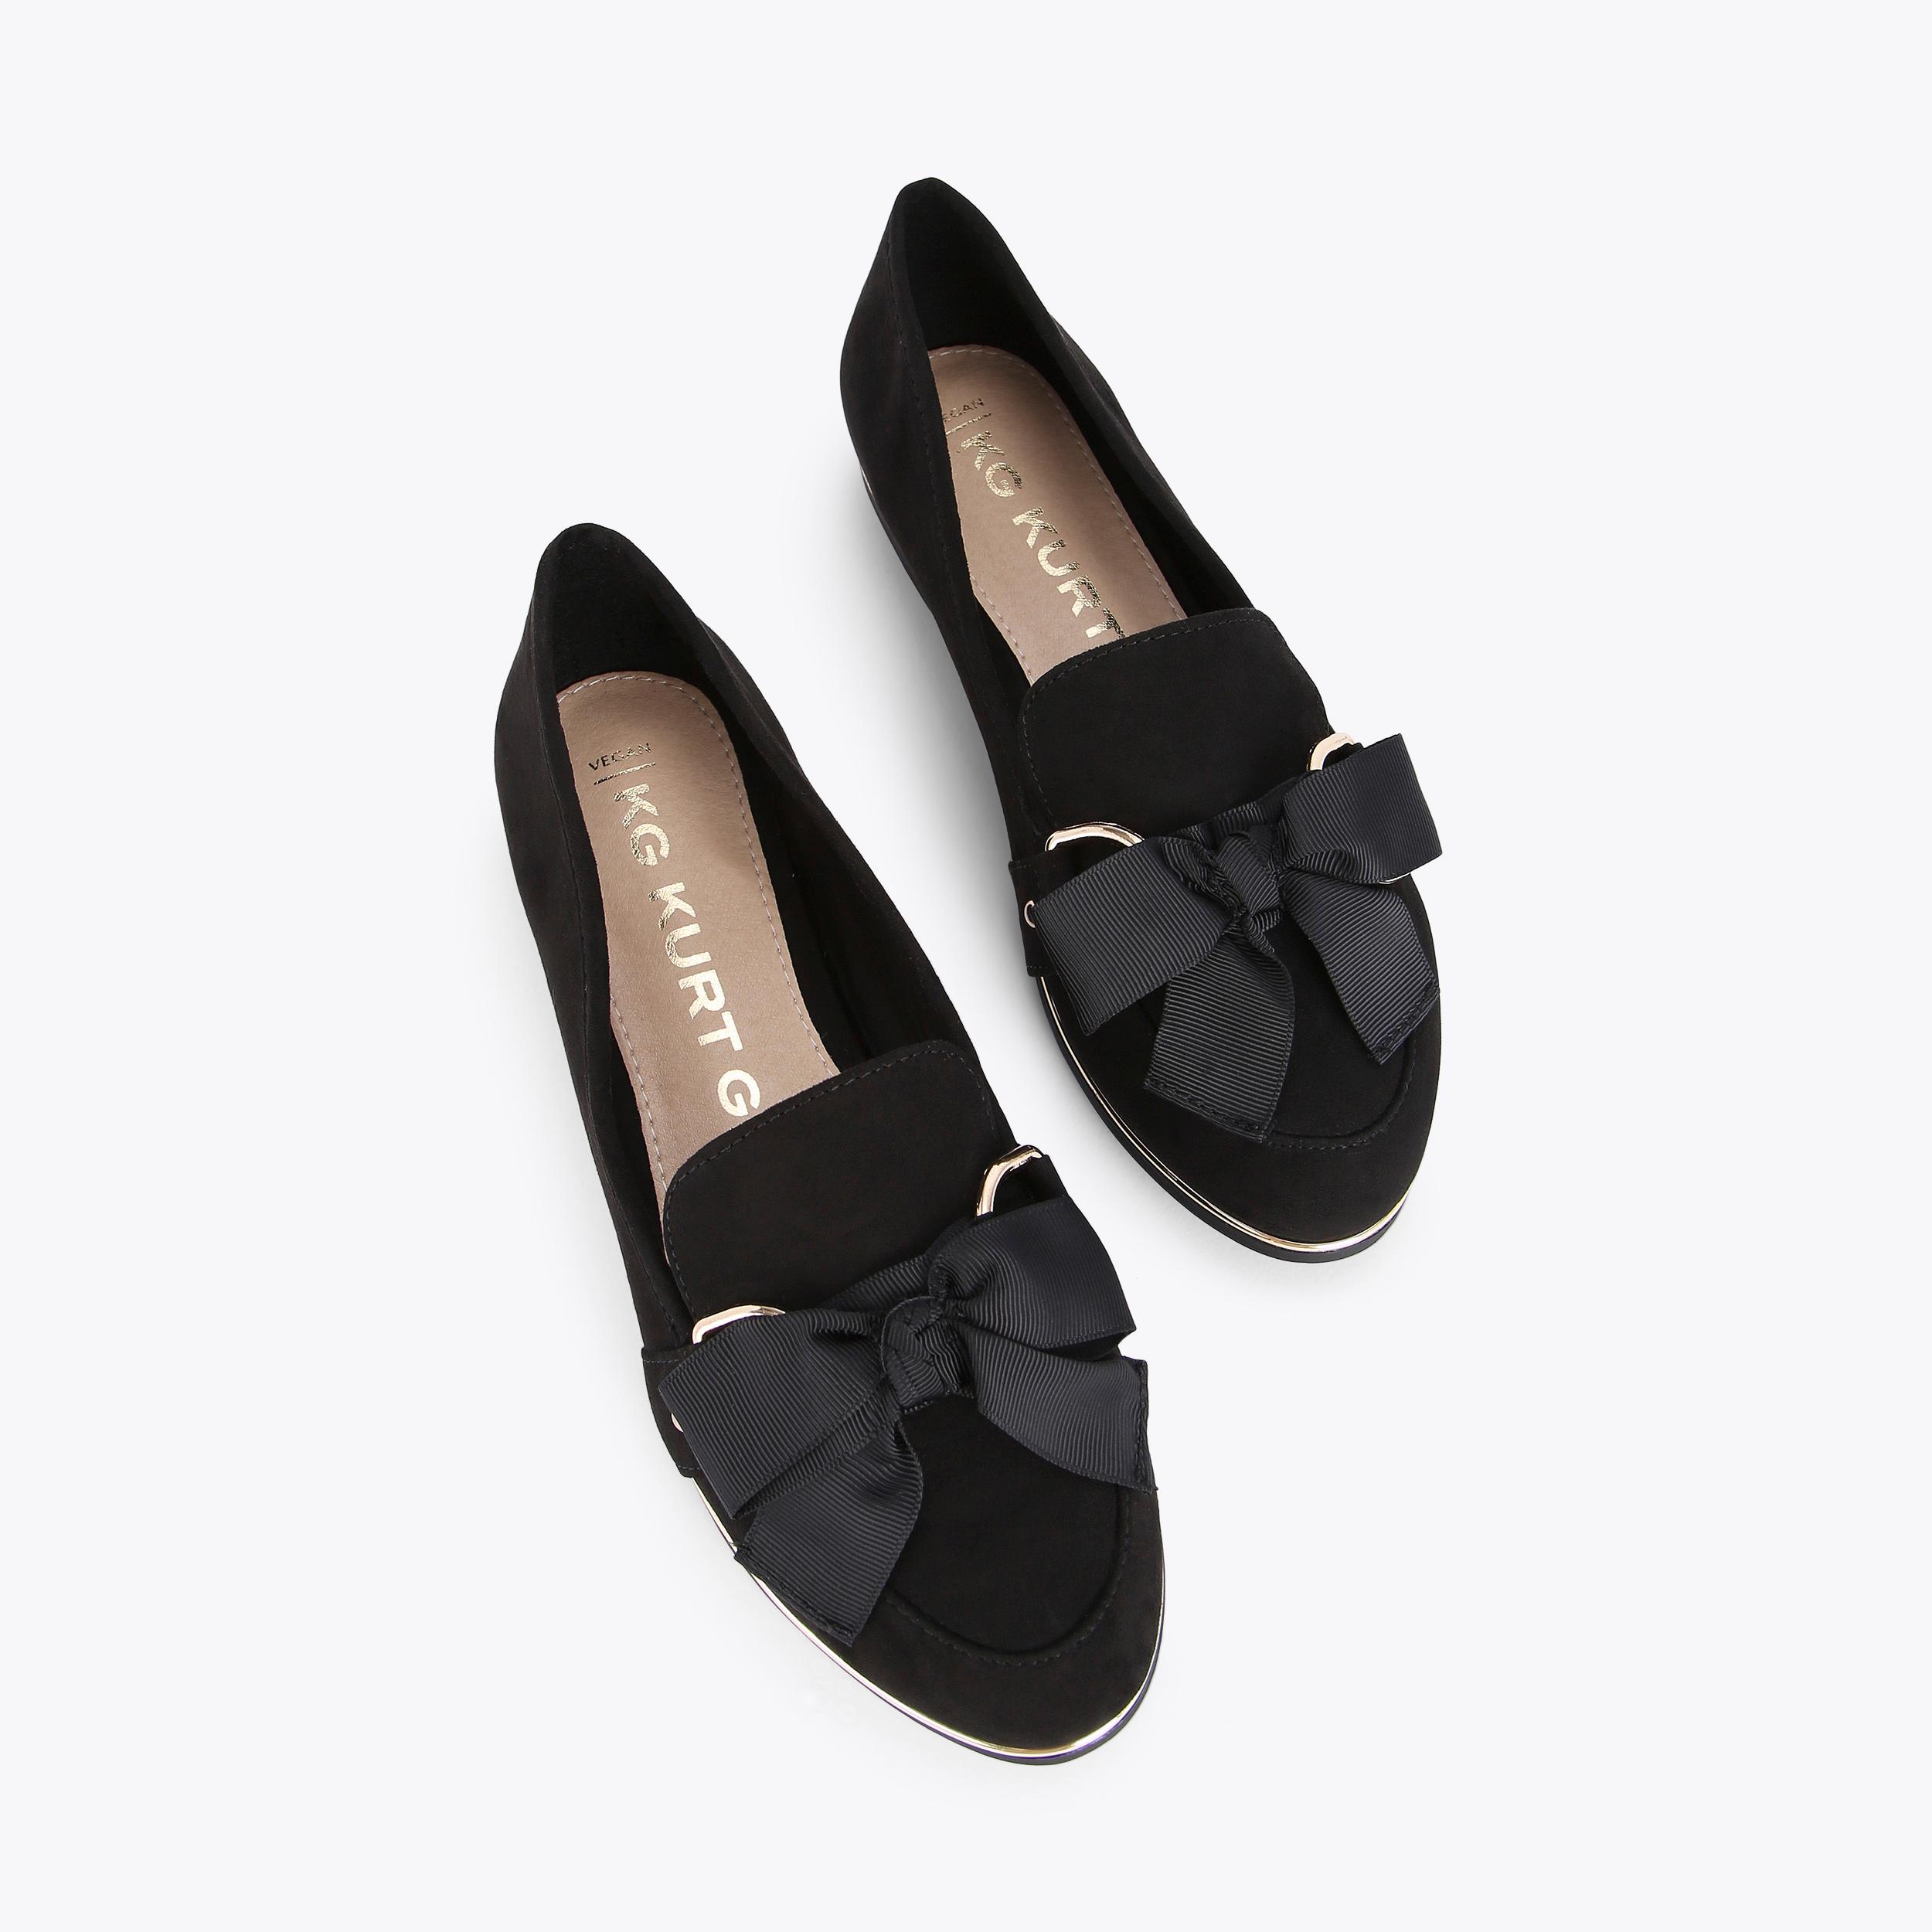 MABLE3 Black Suedette Court Loafers by KG KURT GEIGER